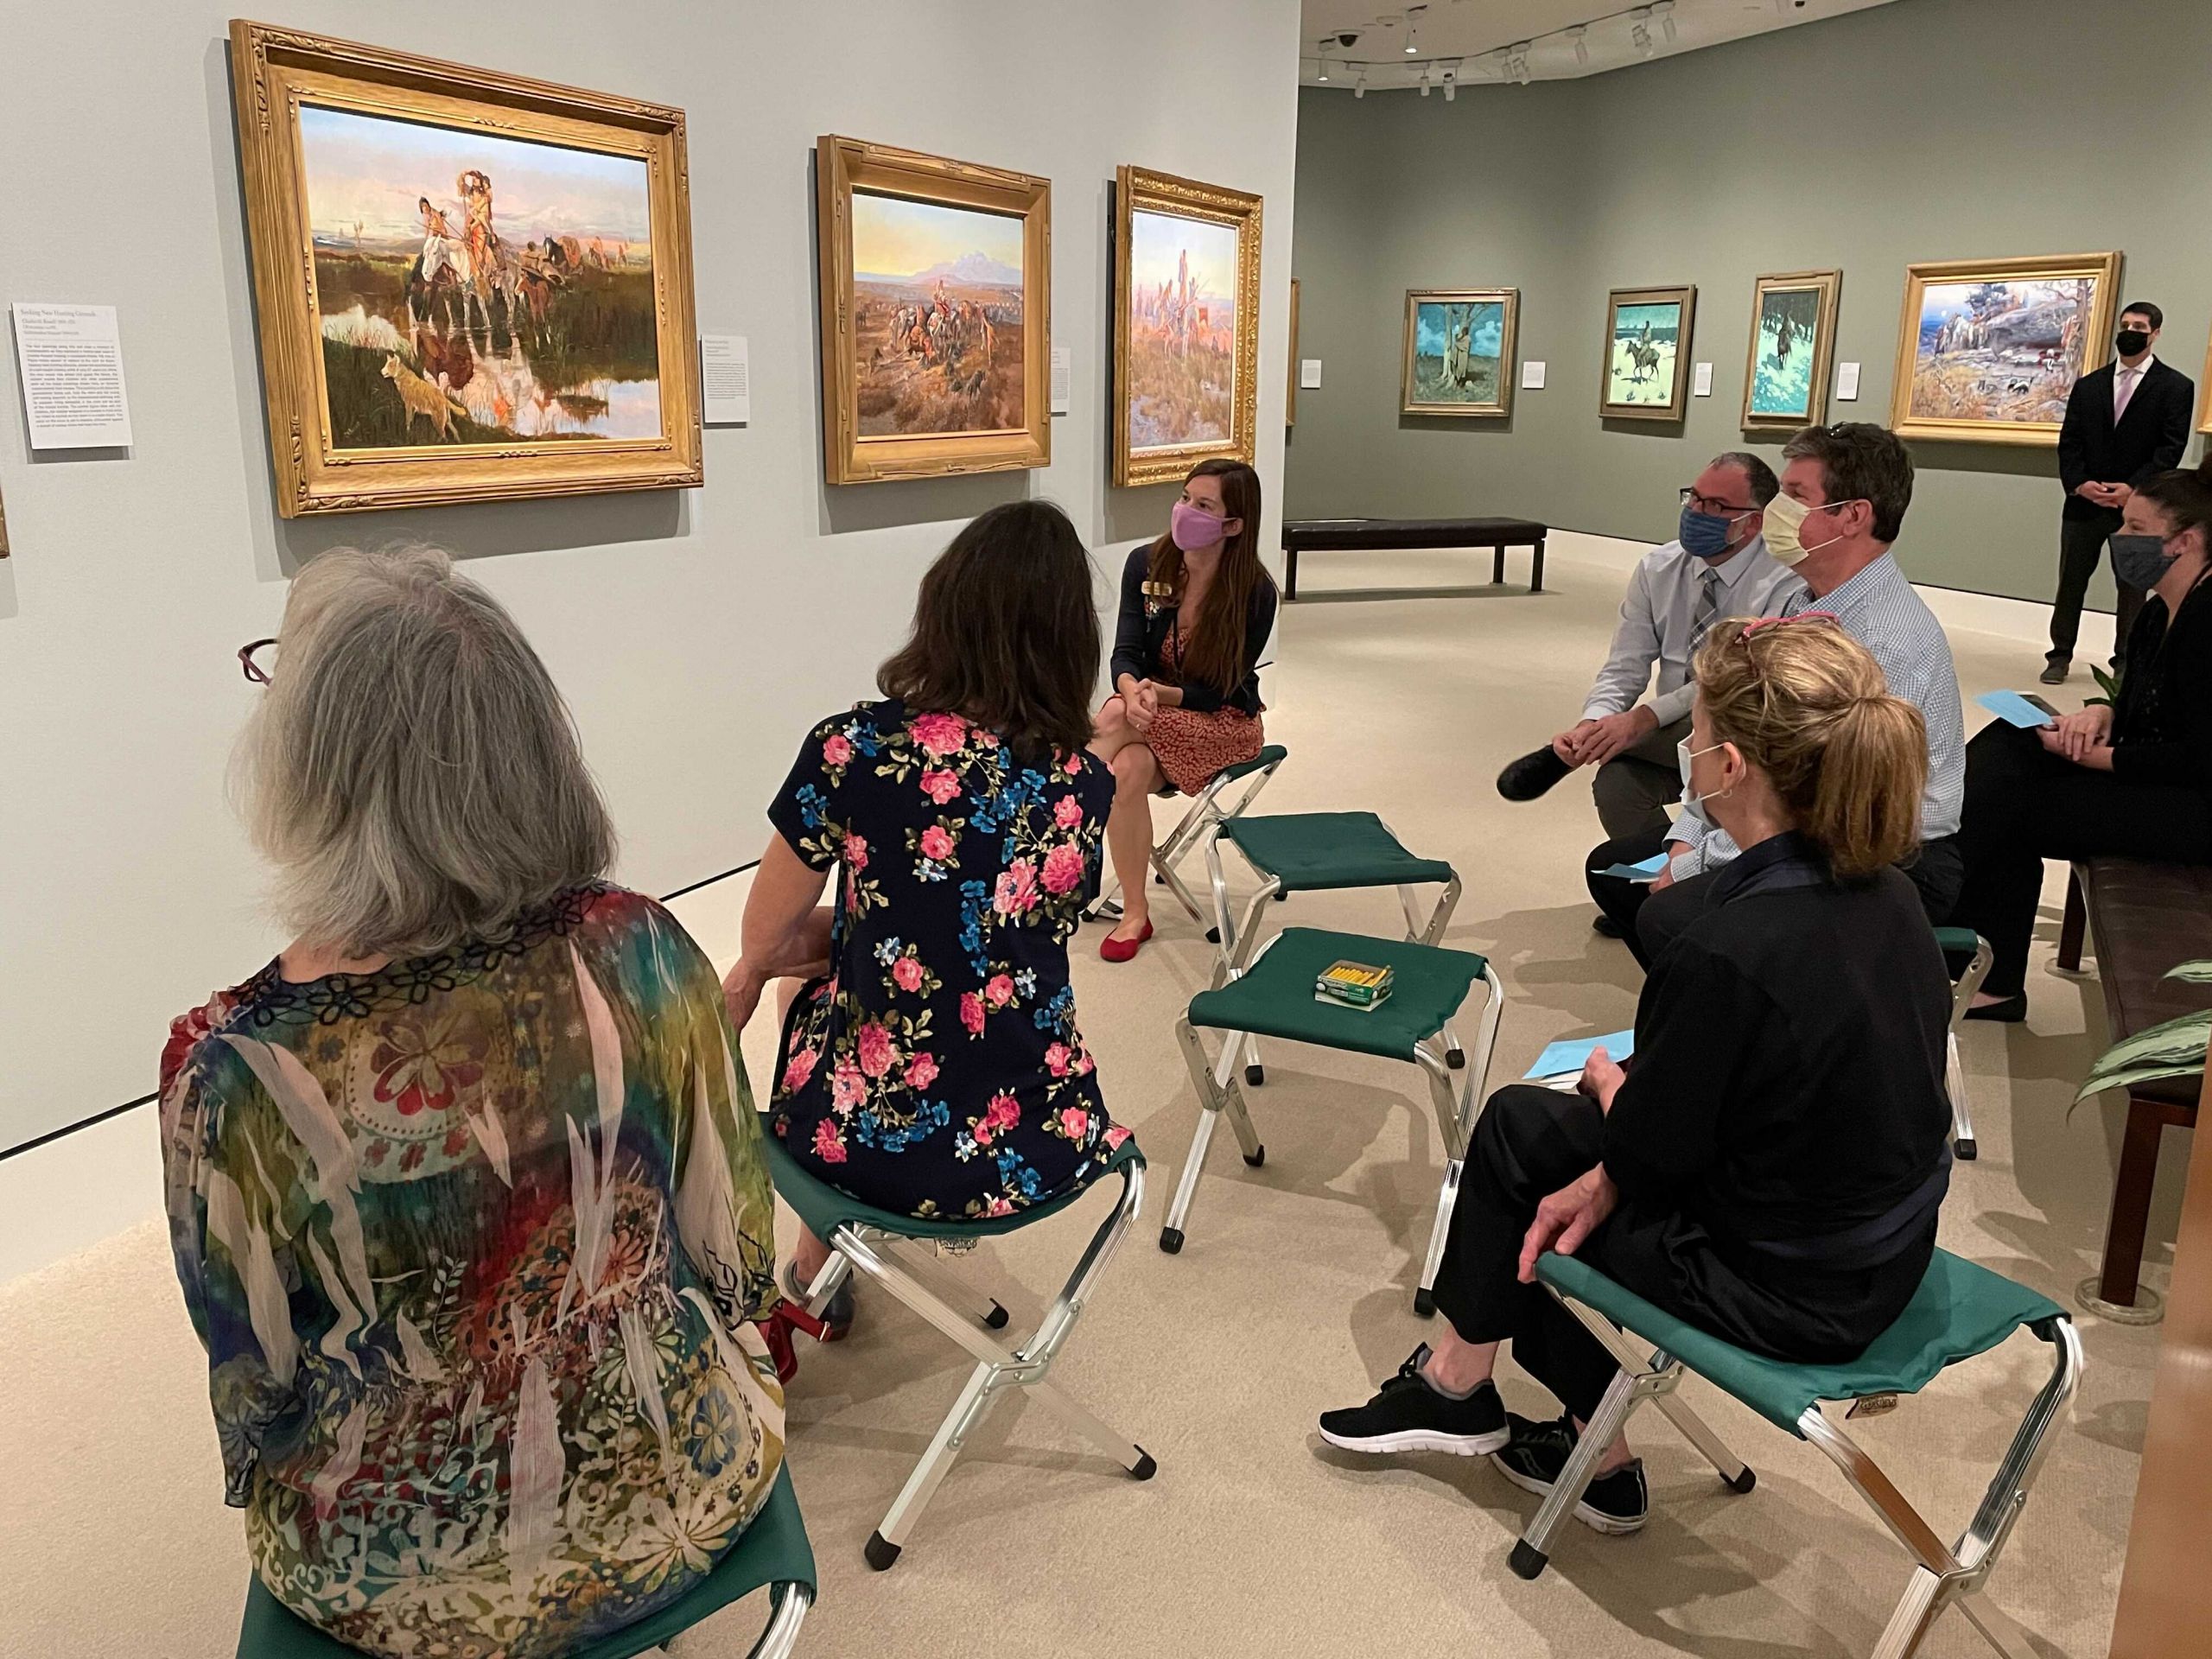 group of people sitting together in an art museum looking at a painting